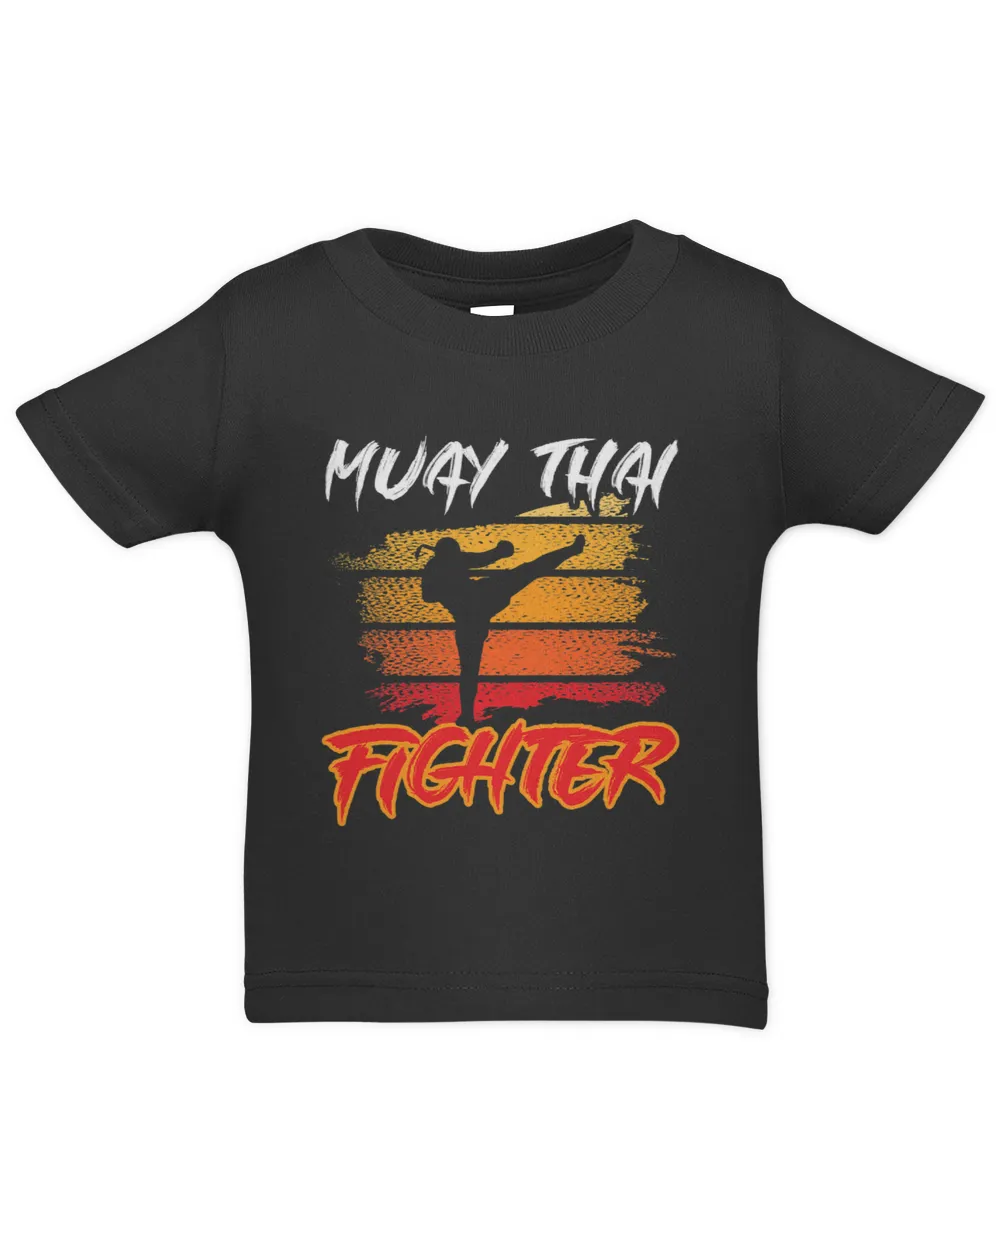 Muay Thai Fighter Martial Arts Boxing Hobby 28